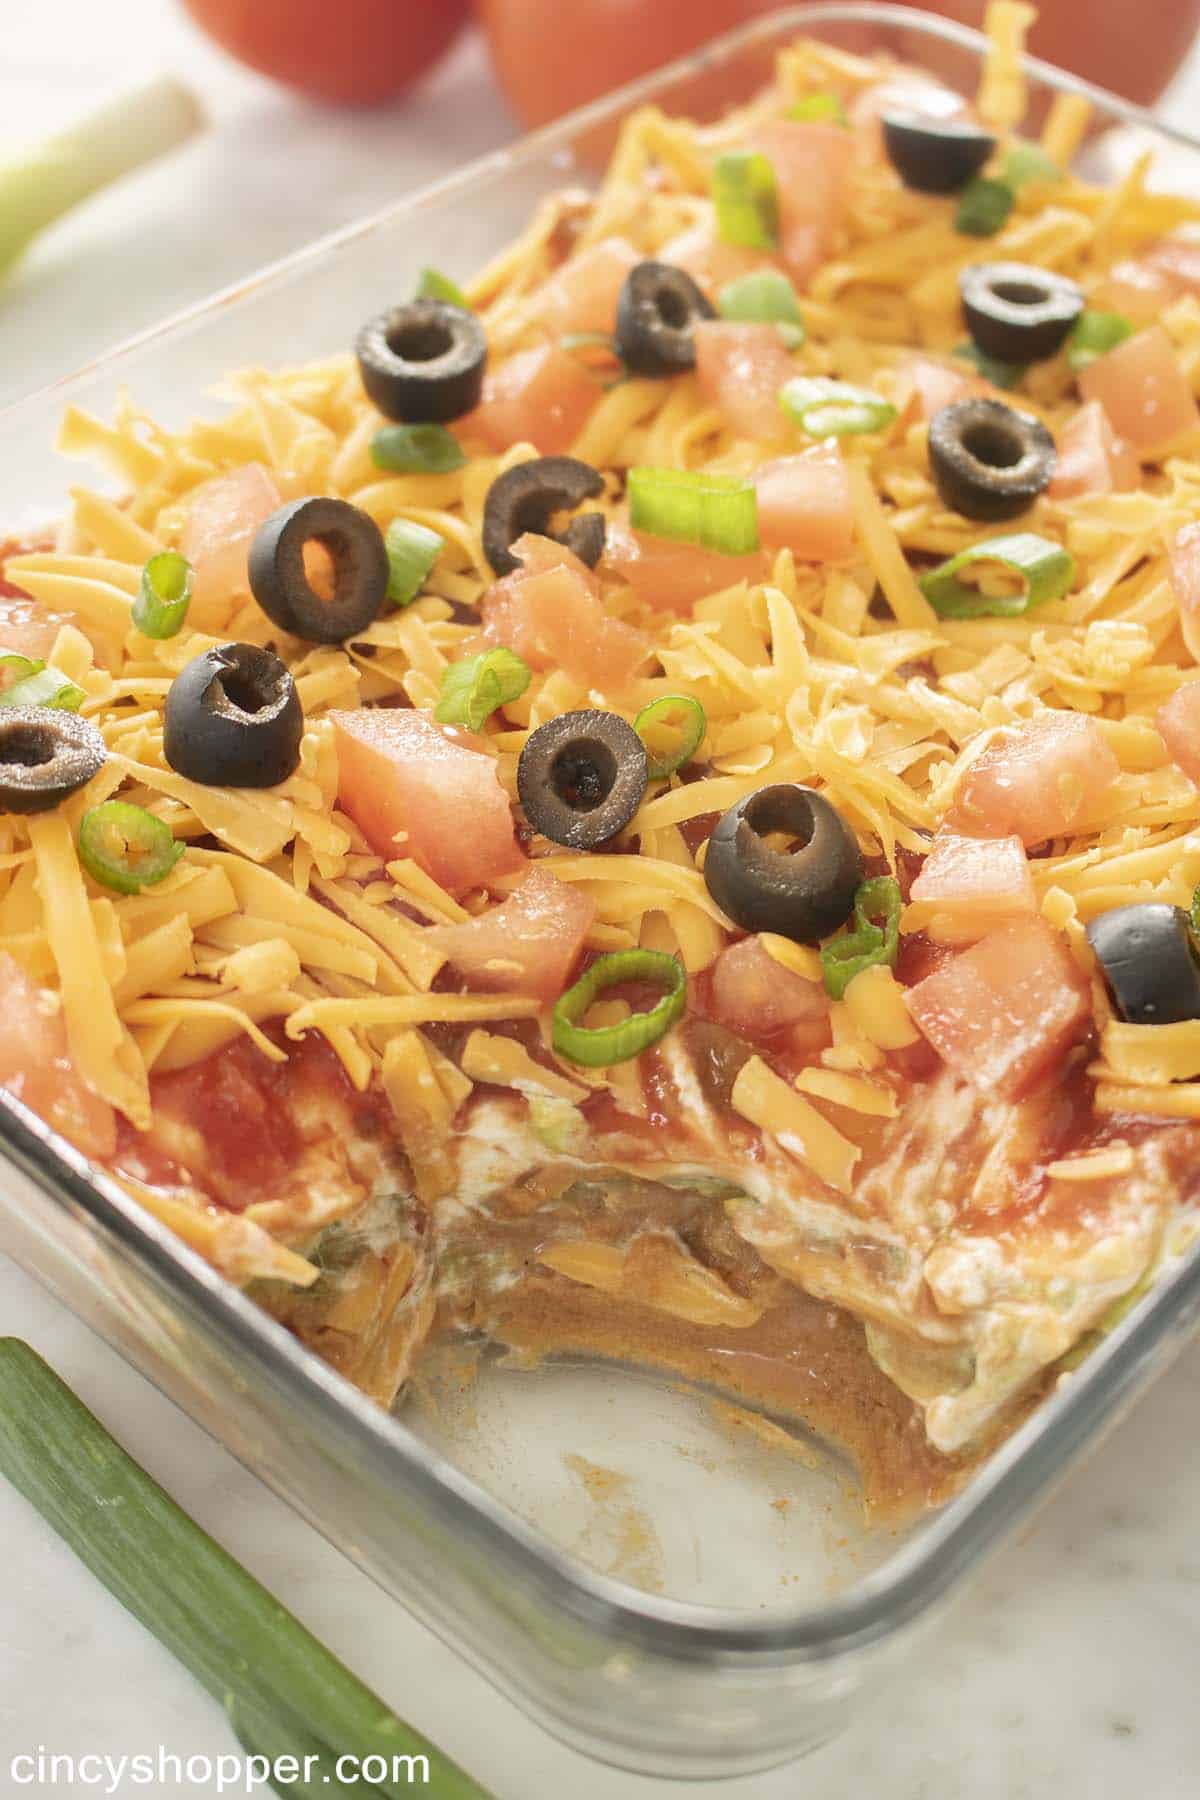 Showing layers of seven layer dip.